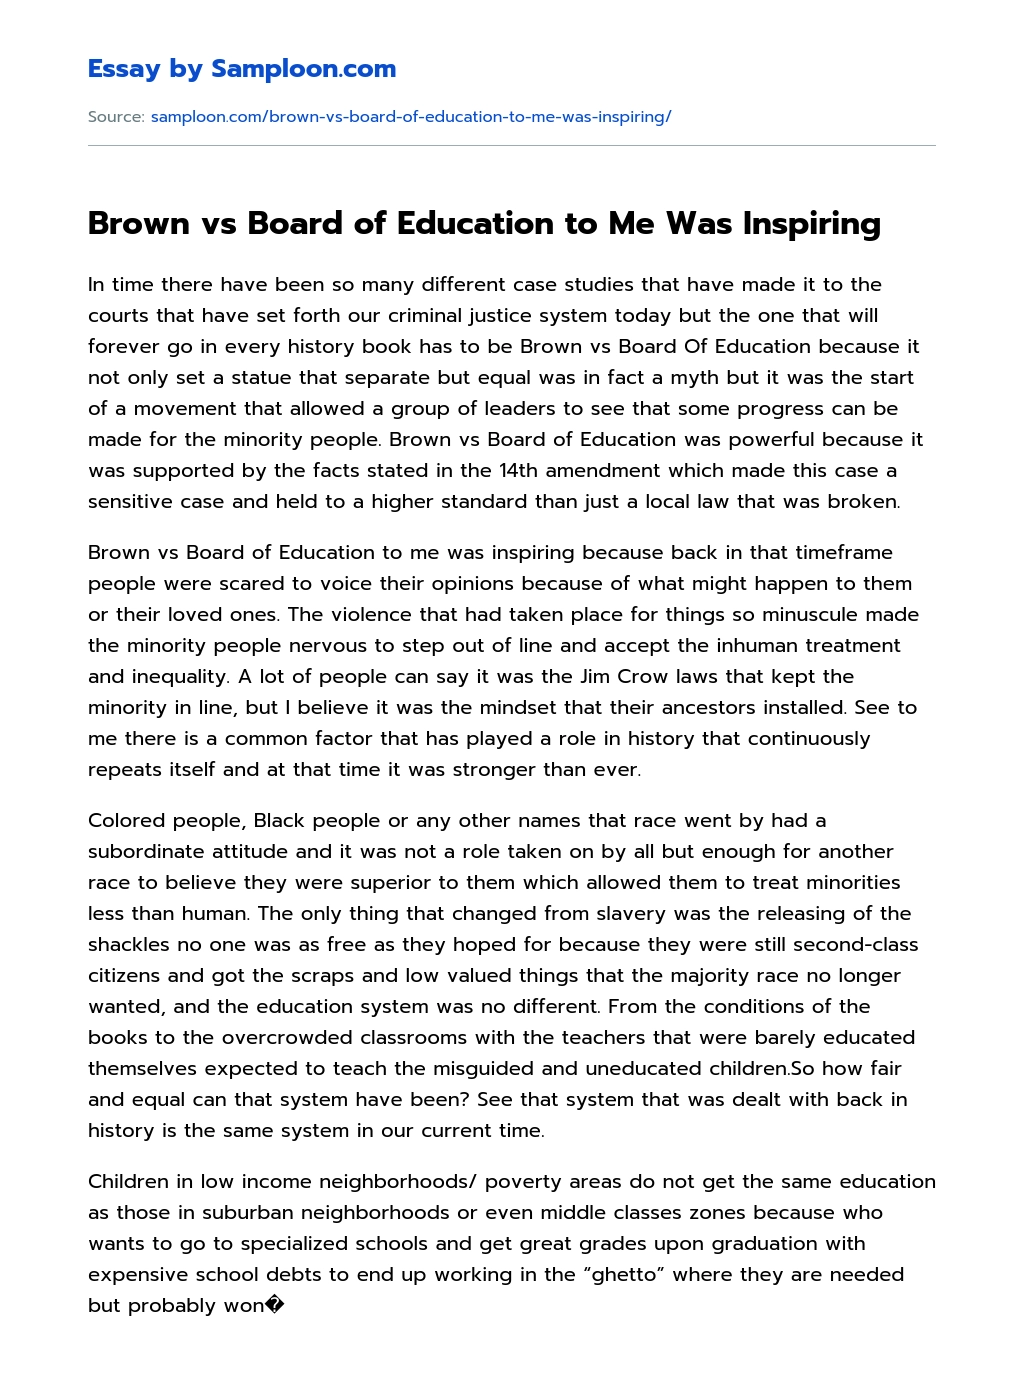 Brown vs Board of Education to Me Was Inspiring essay